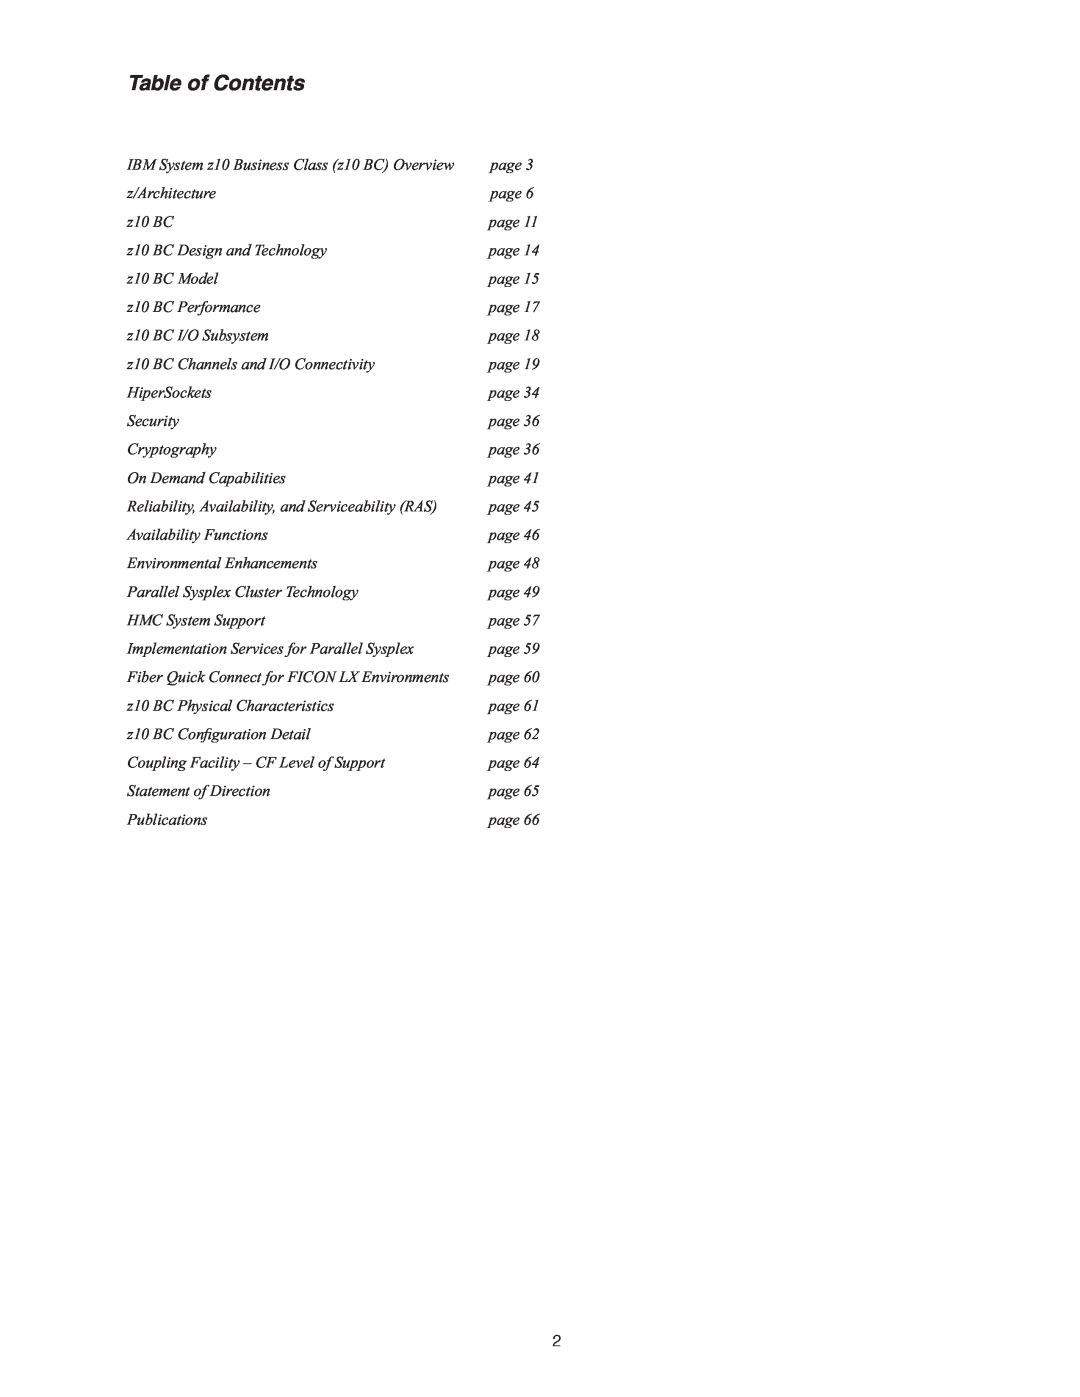 IBM Z10 BC manual Table of Contents 